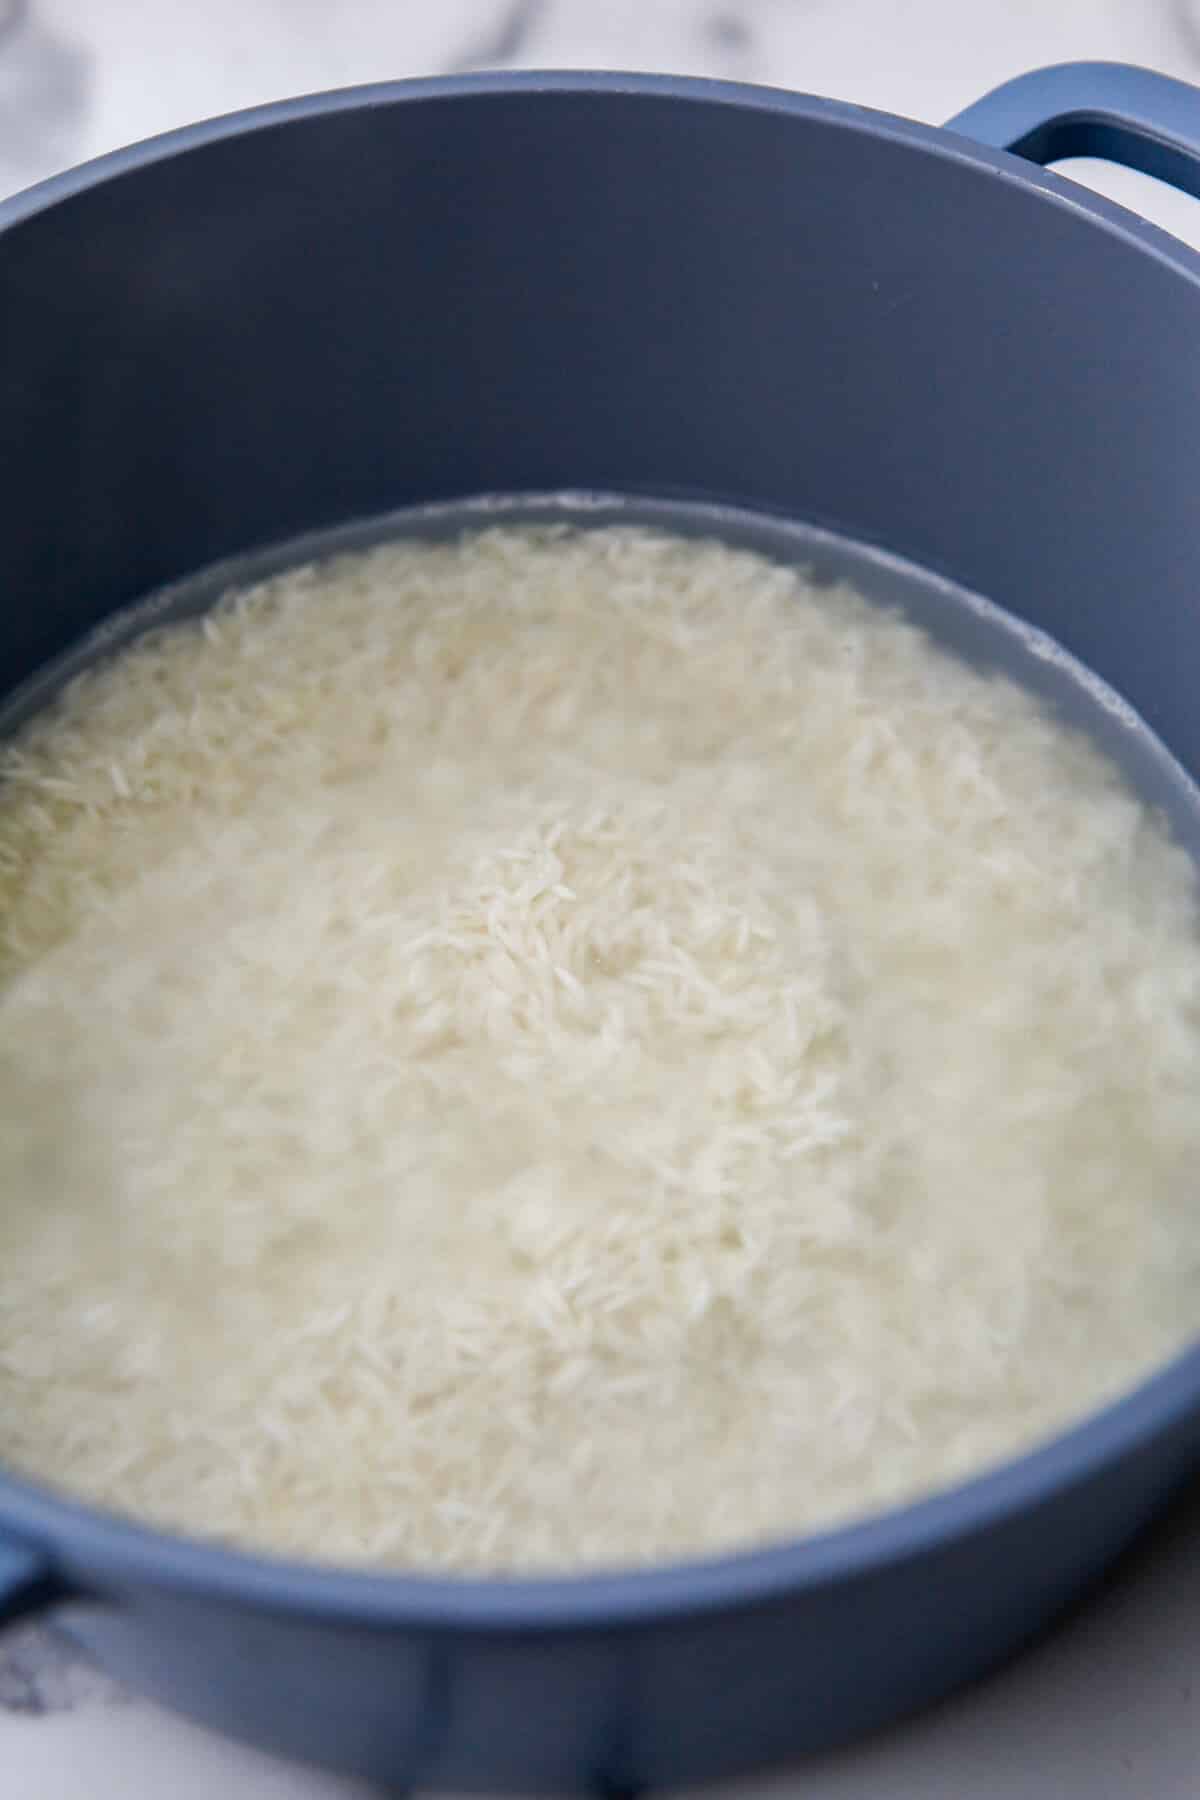 Basmati rice and water in a pot before cooking.